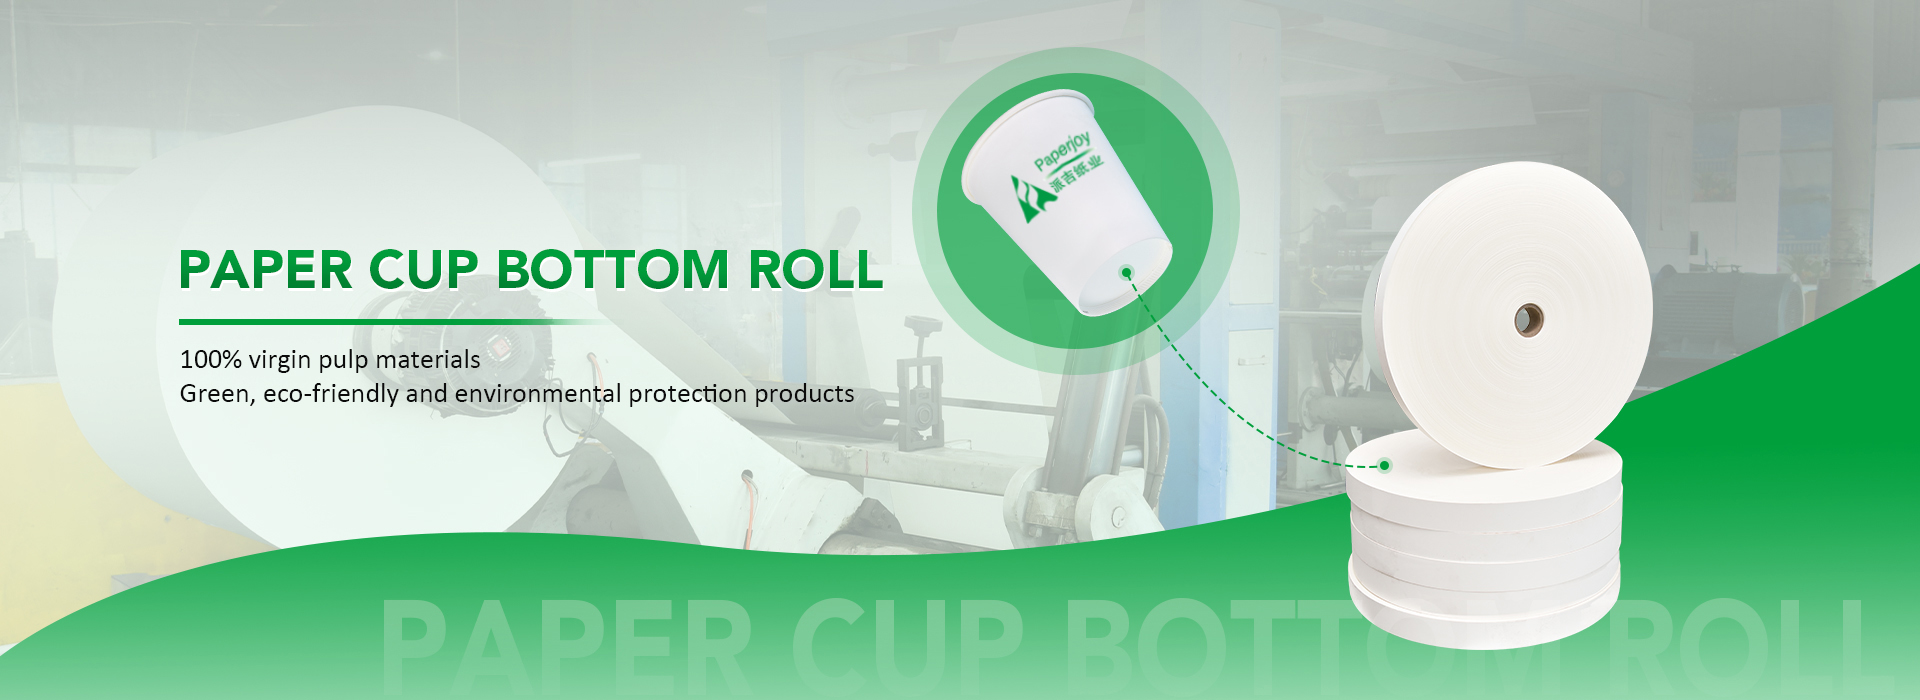 cup bottom banner-2